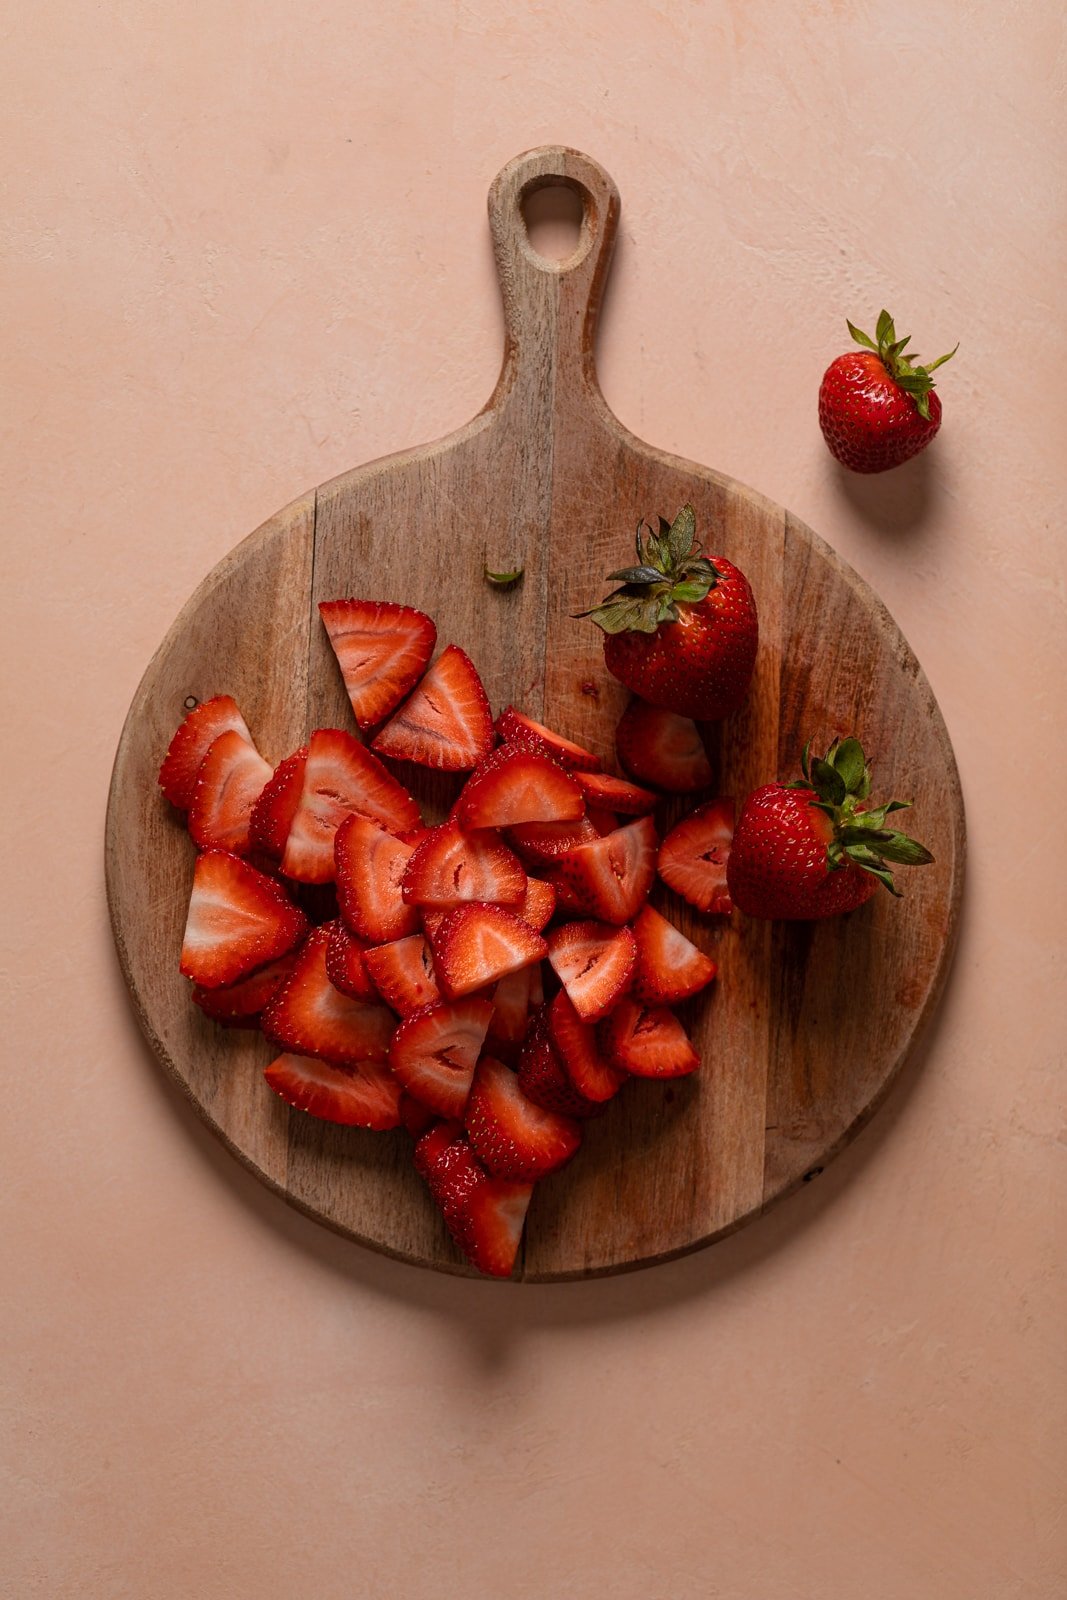 Strawberries and strawberry pieces on a wooden cutting board